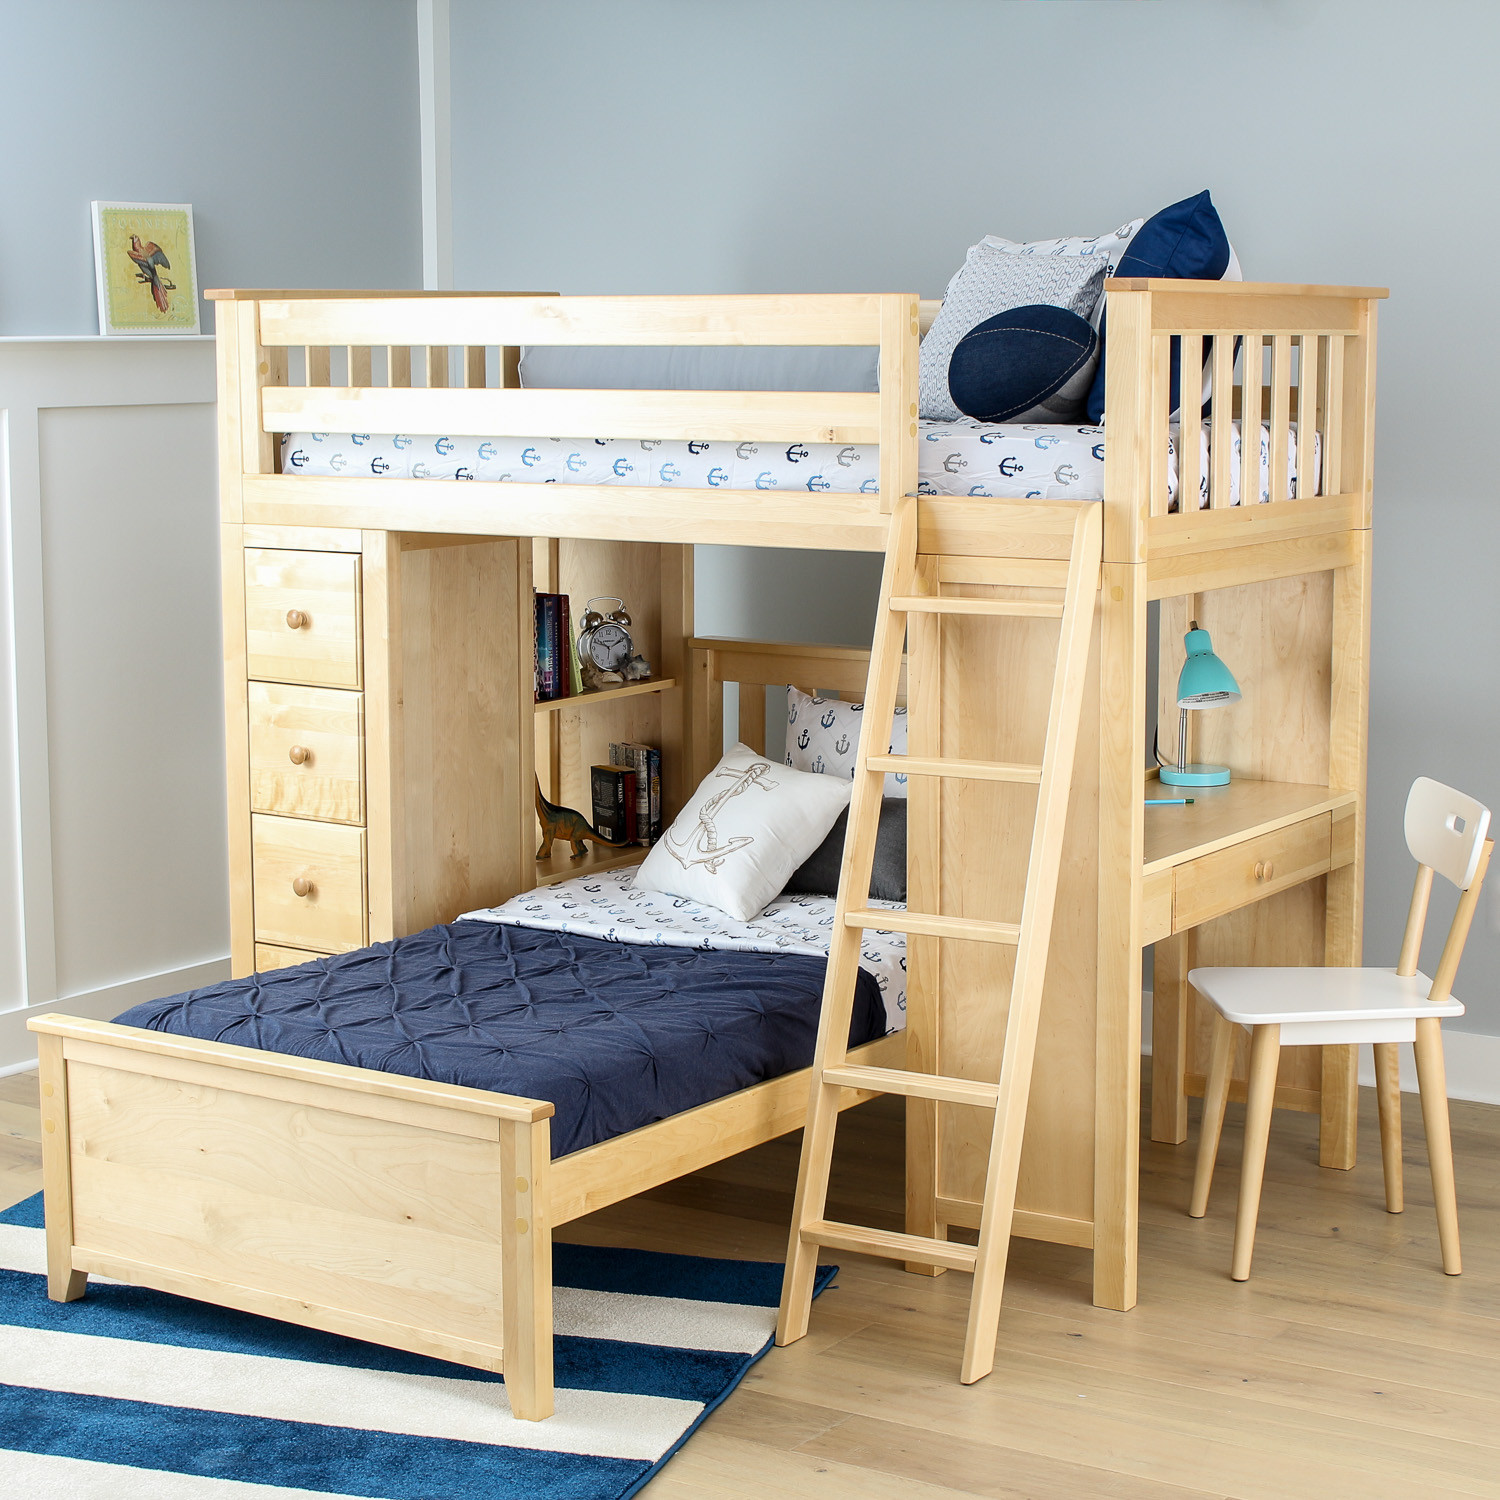 Childrens Loft Bed With Storage
 All in e Loft Bed Storage Study Twin Bed Natural